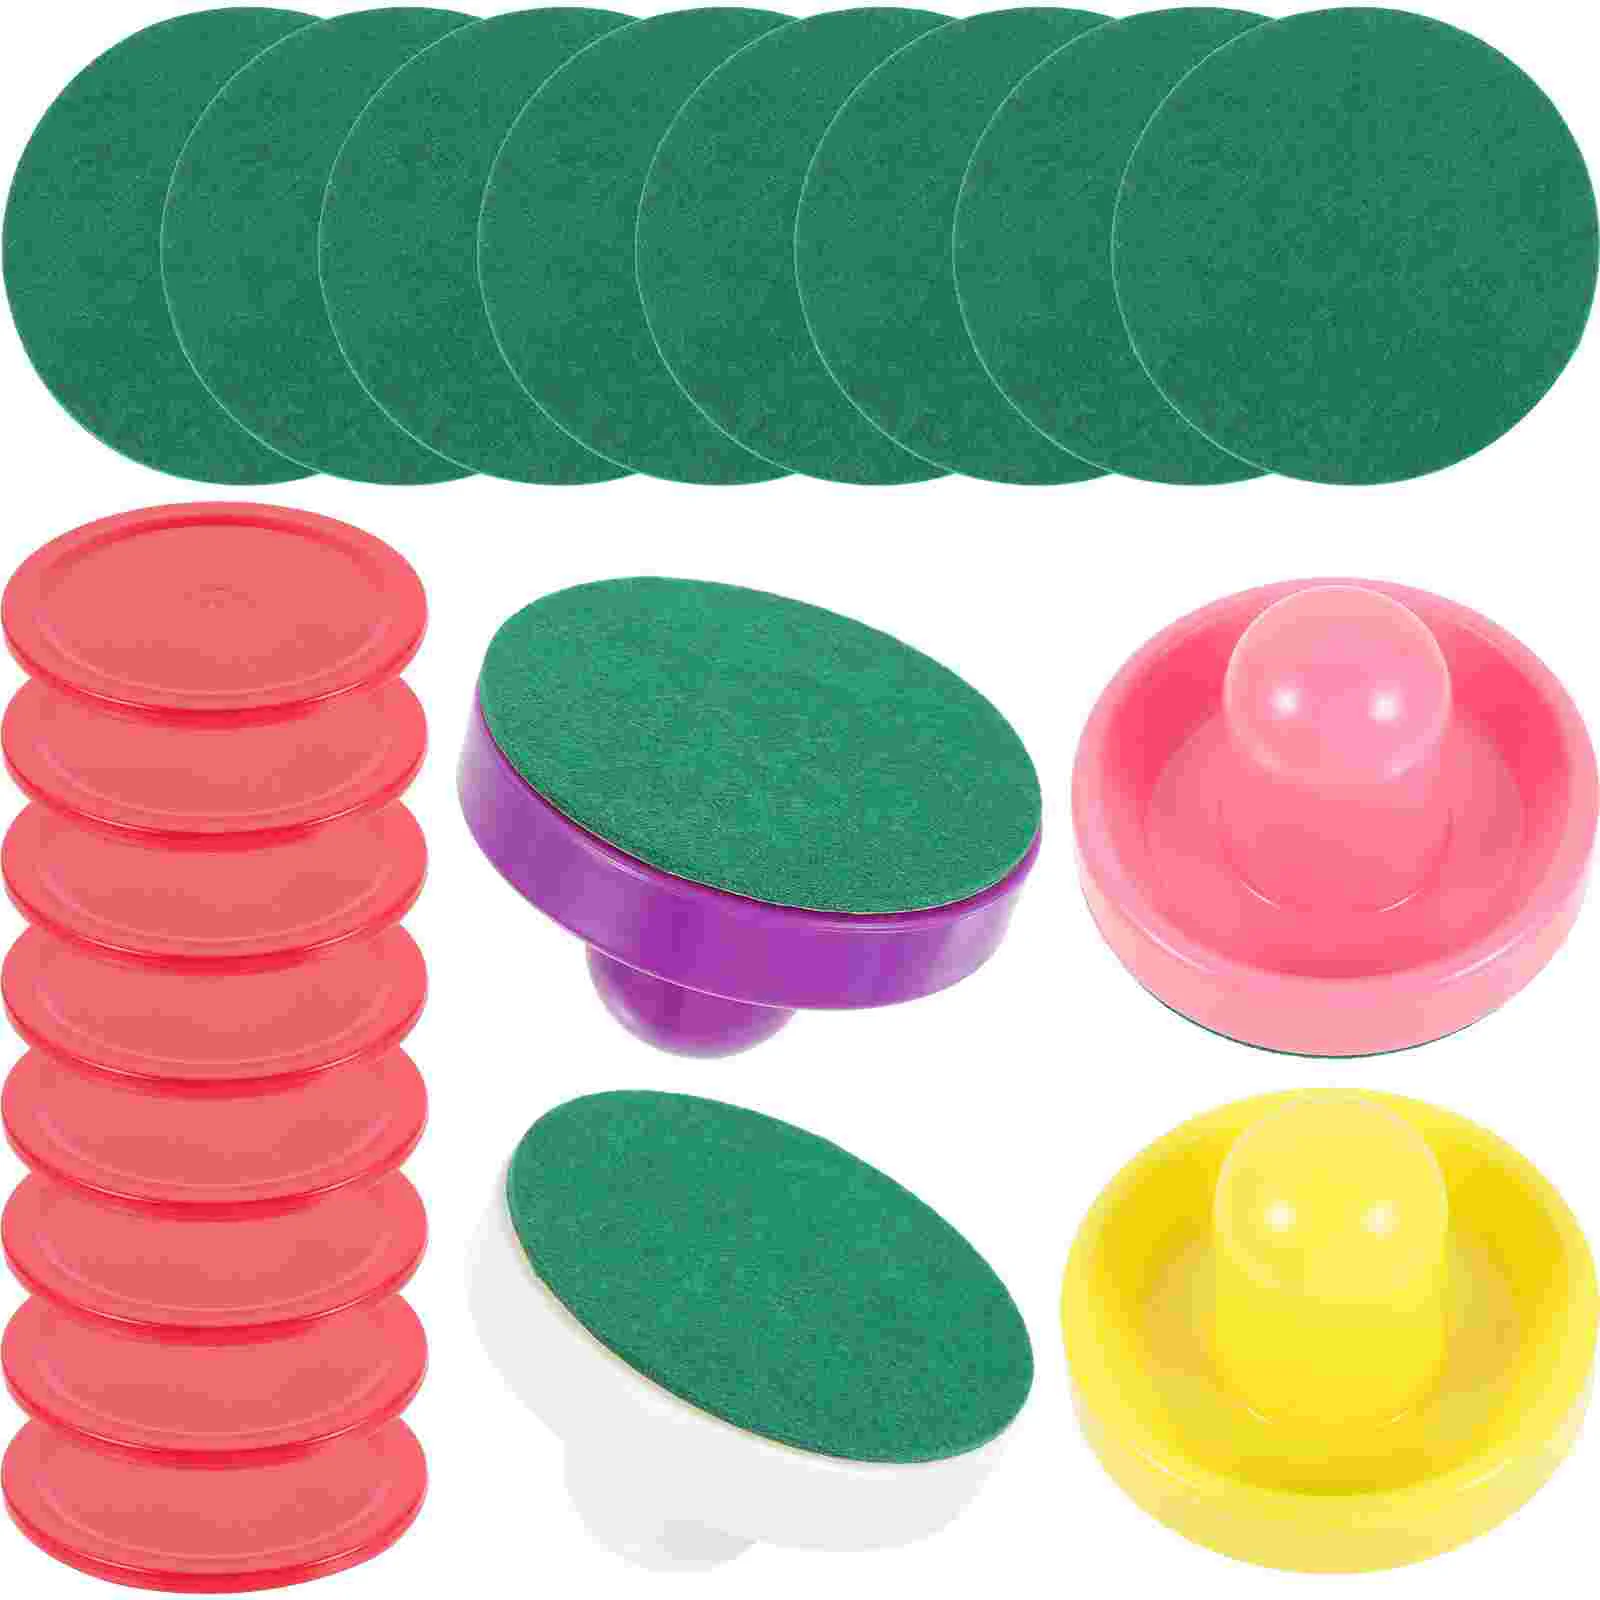 

Hockey Air Cover Party Supplies Paddles Tabletop Pusher Game Accessories Shipping Pucks